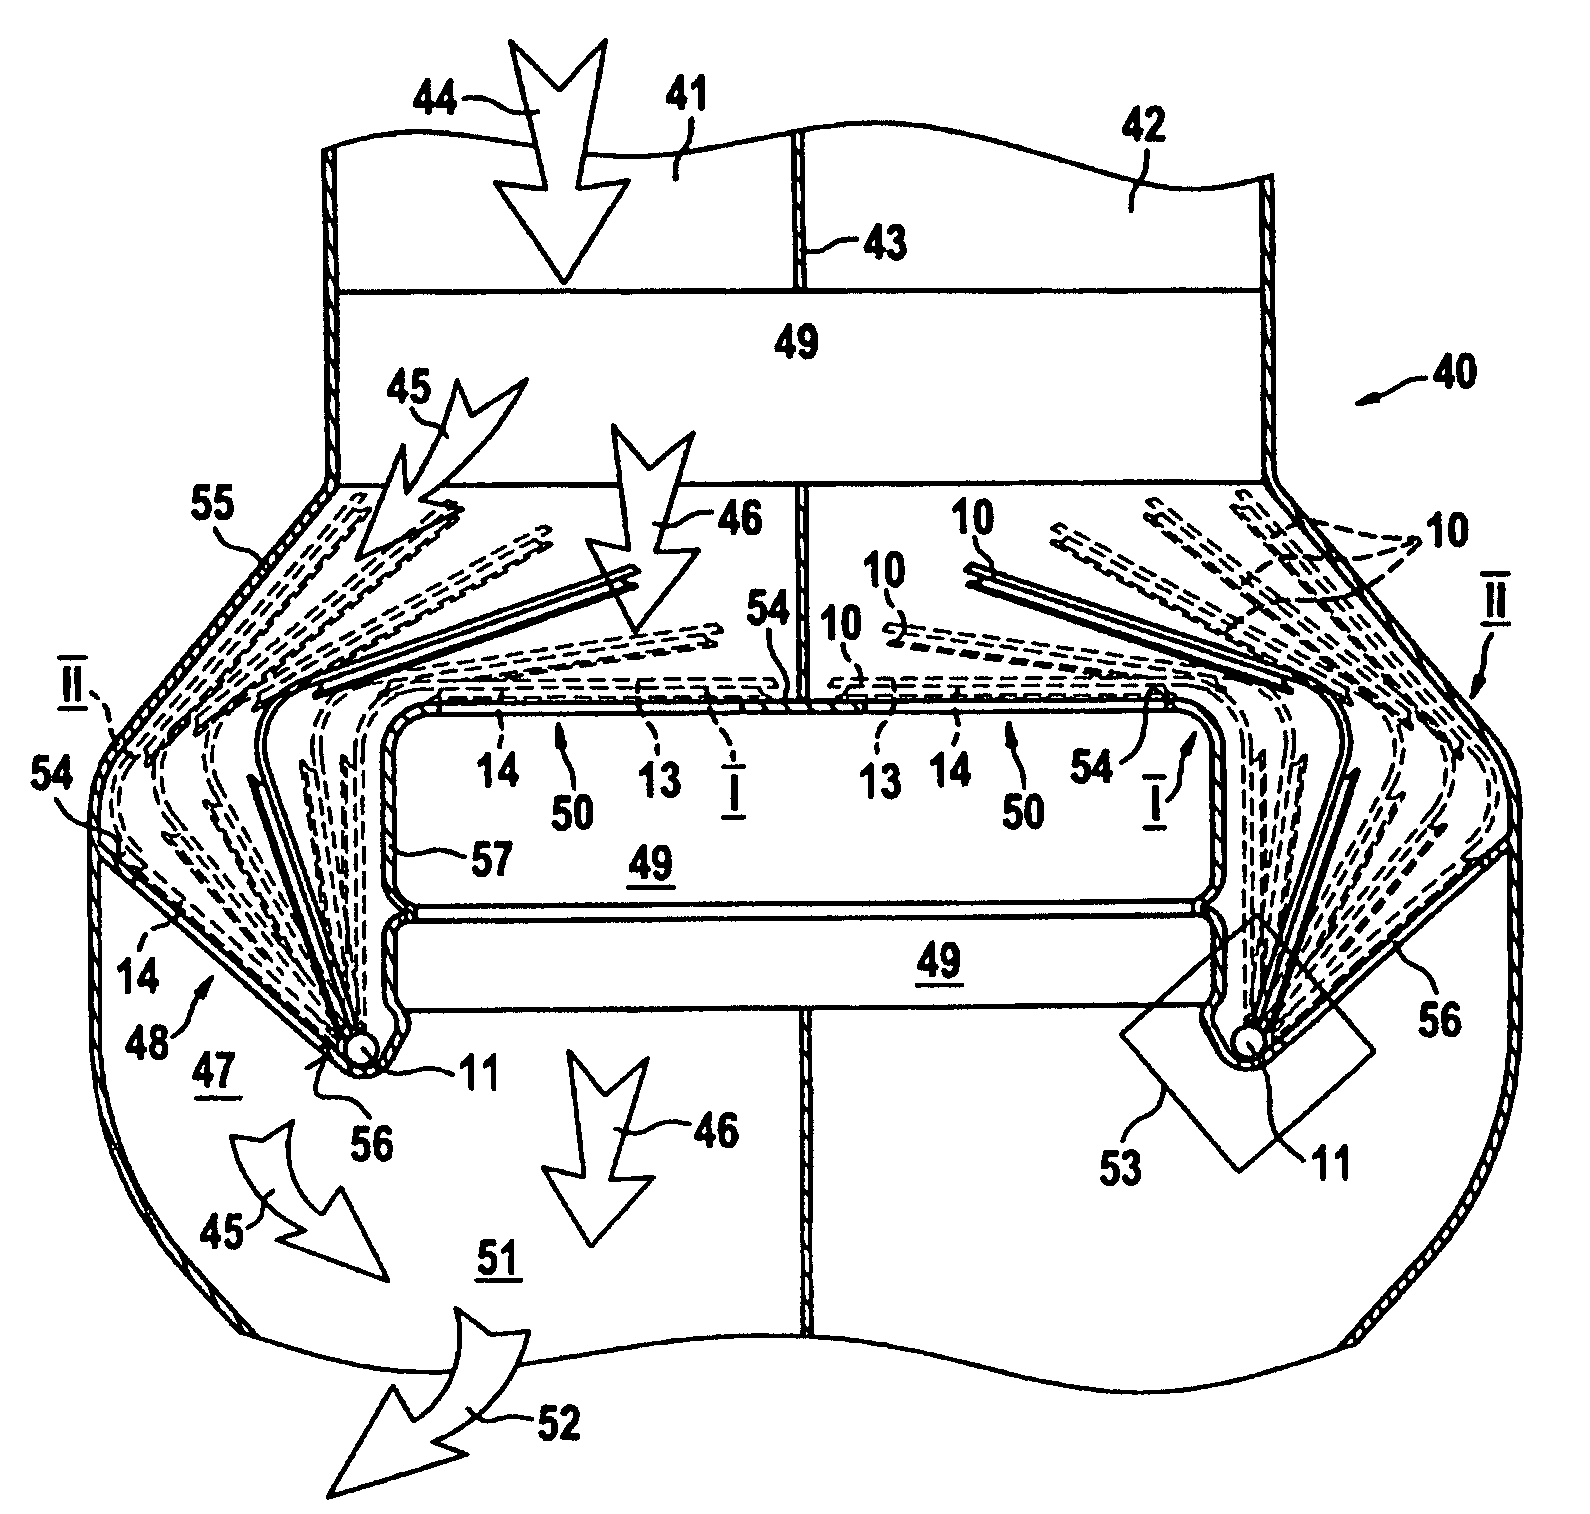 Air channel flap and flow guiding device